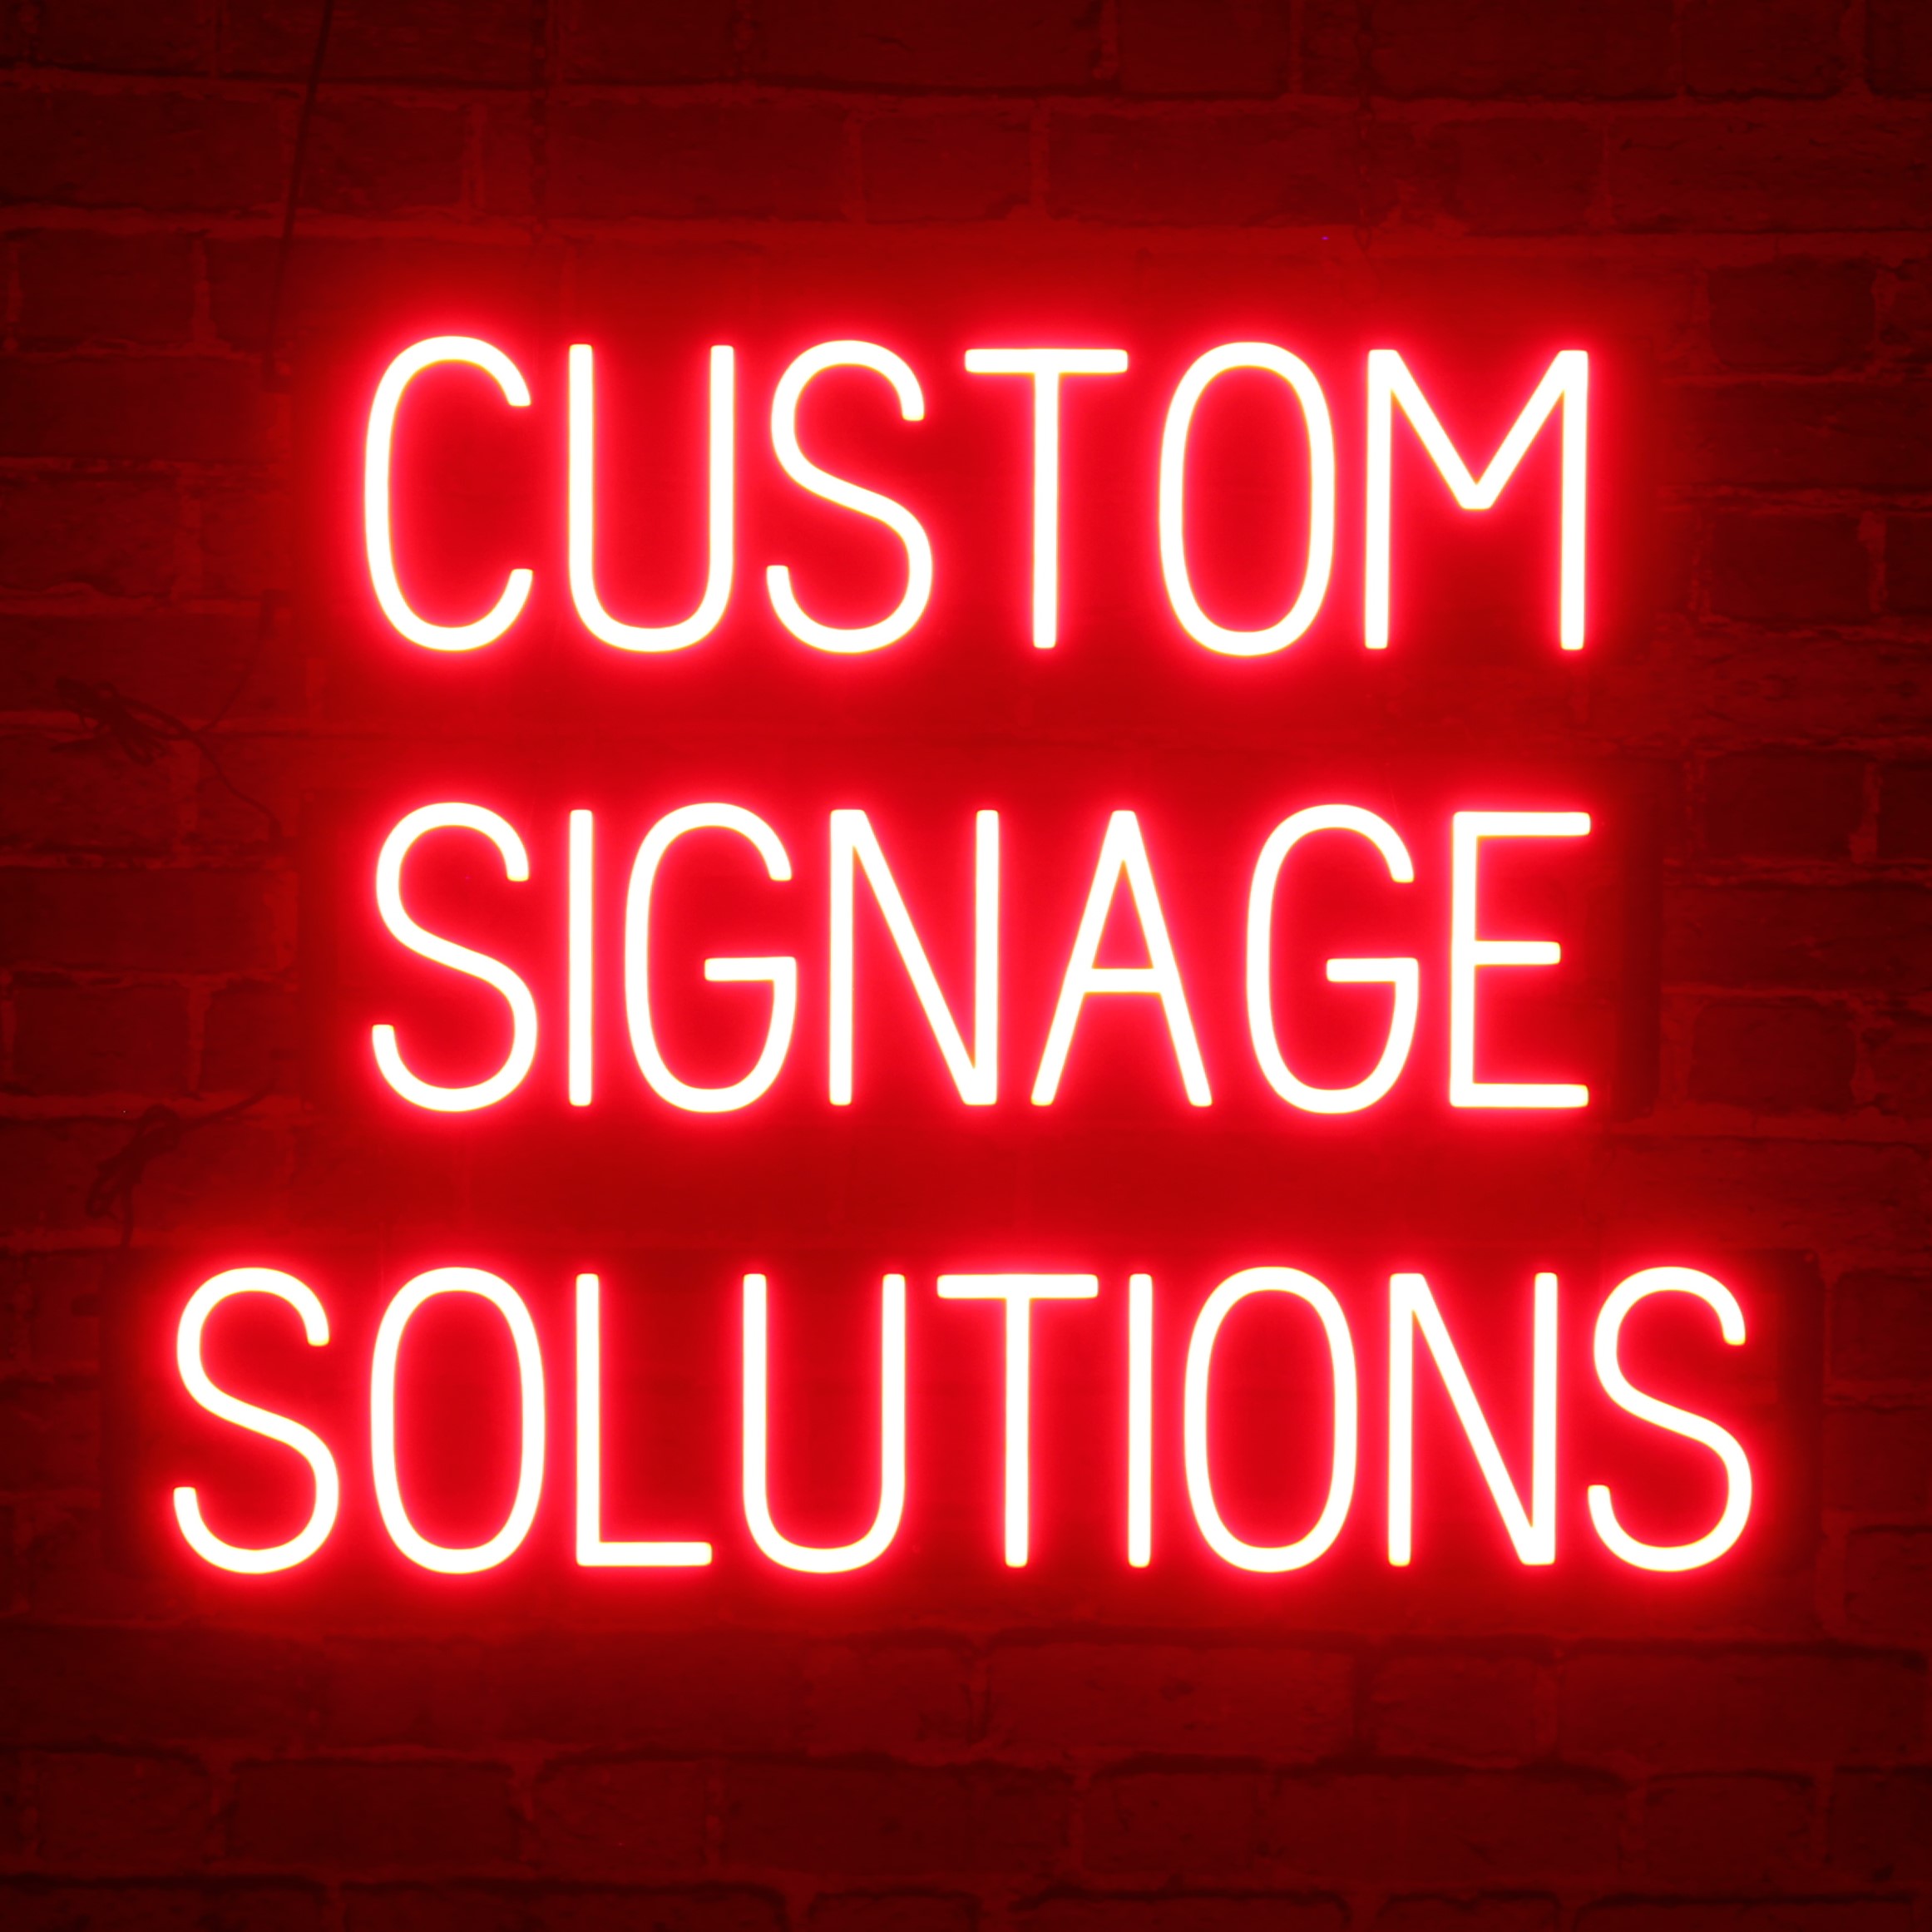 Custom Signage Solutions Image Showing Customized Business Sign Solutions from SpellBrite